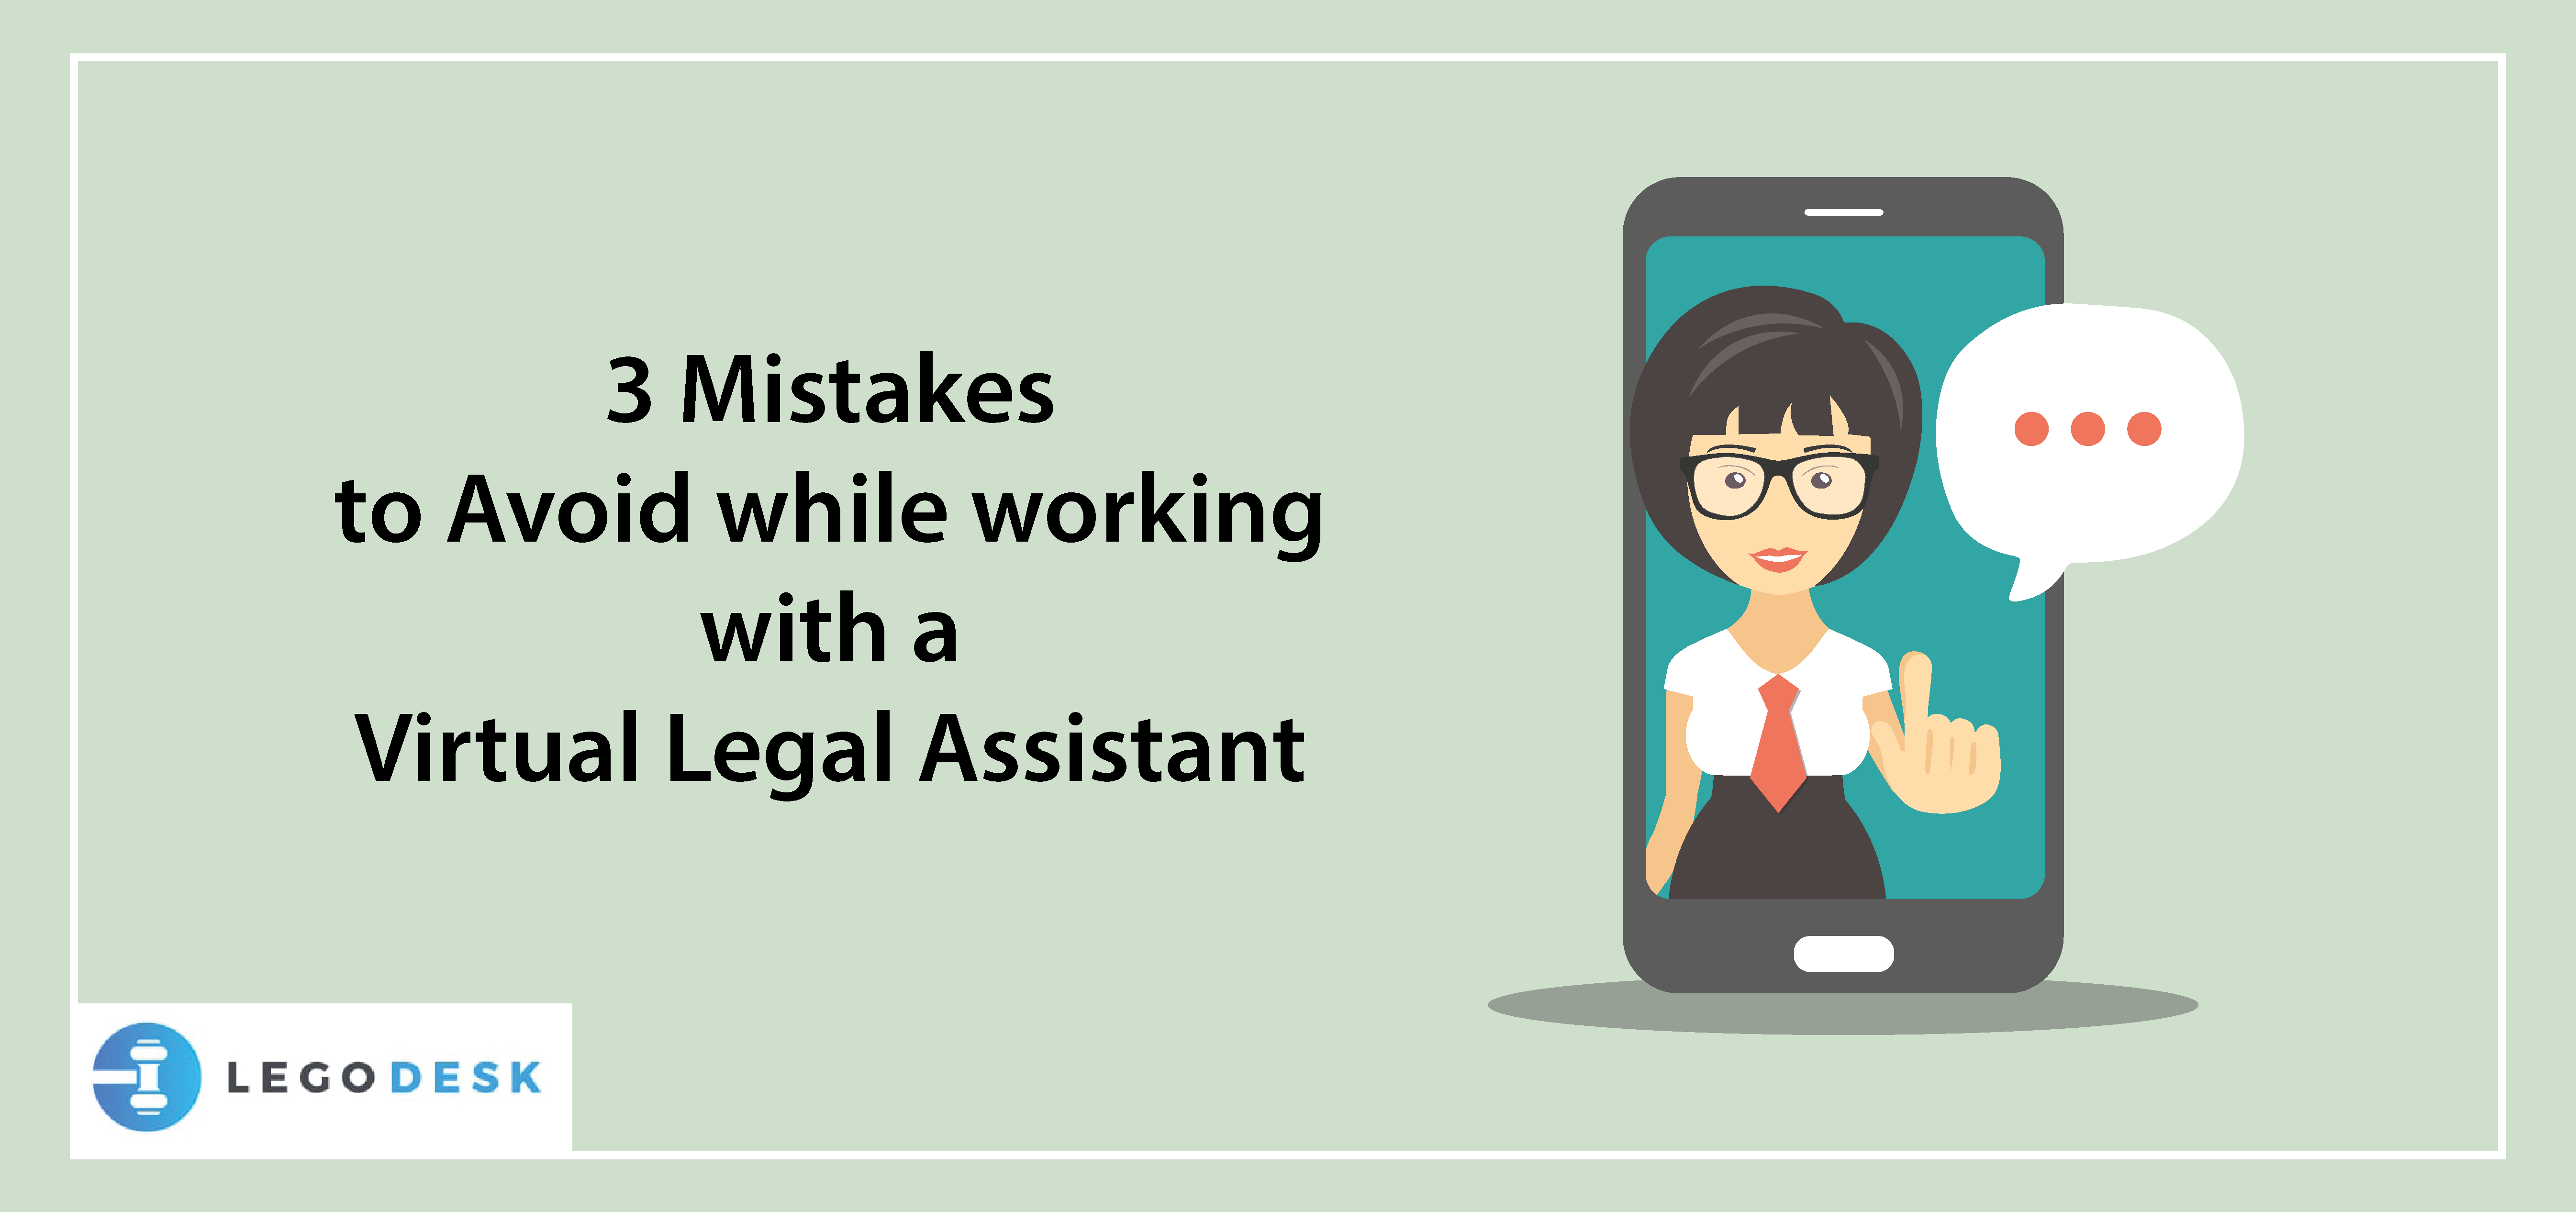 3 Mistakes to Avoid while Working with a Virtual Legal Assistant